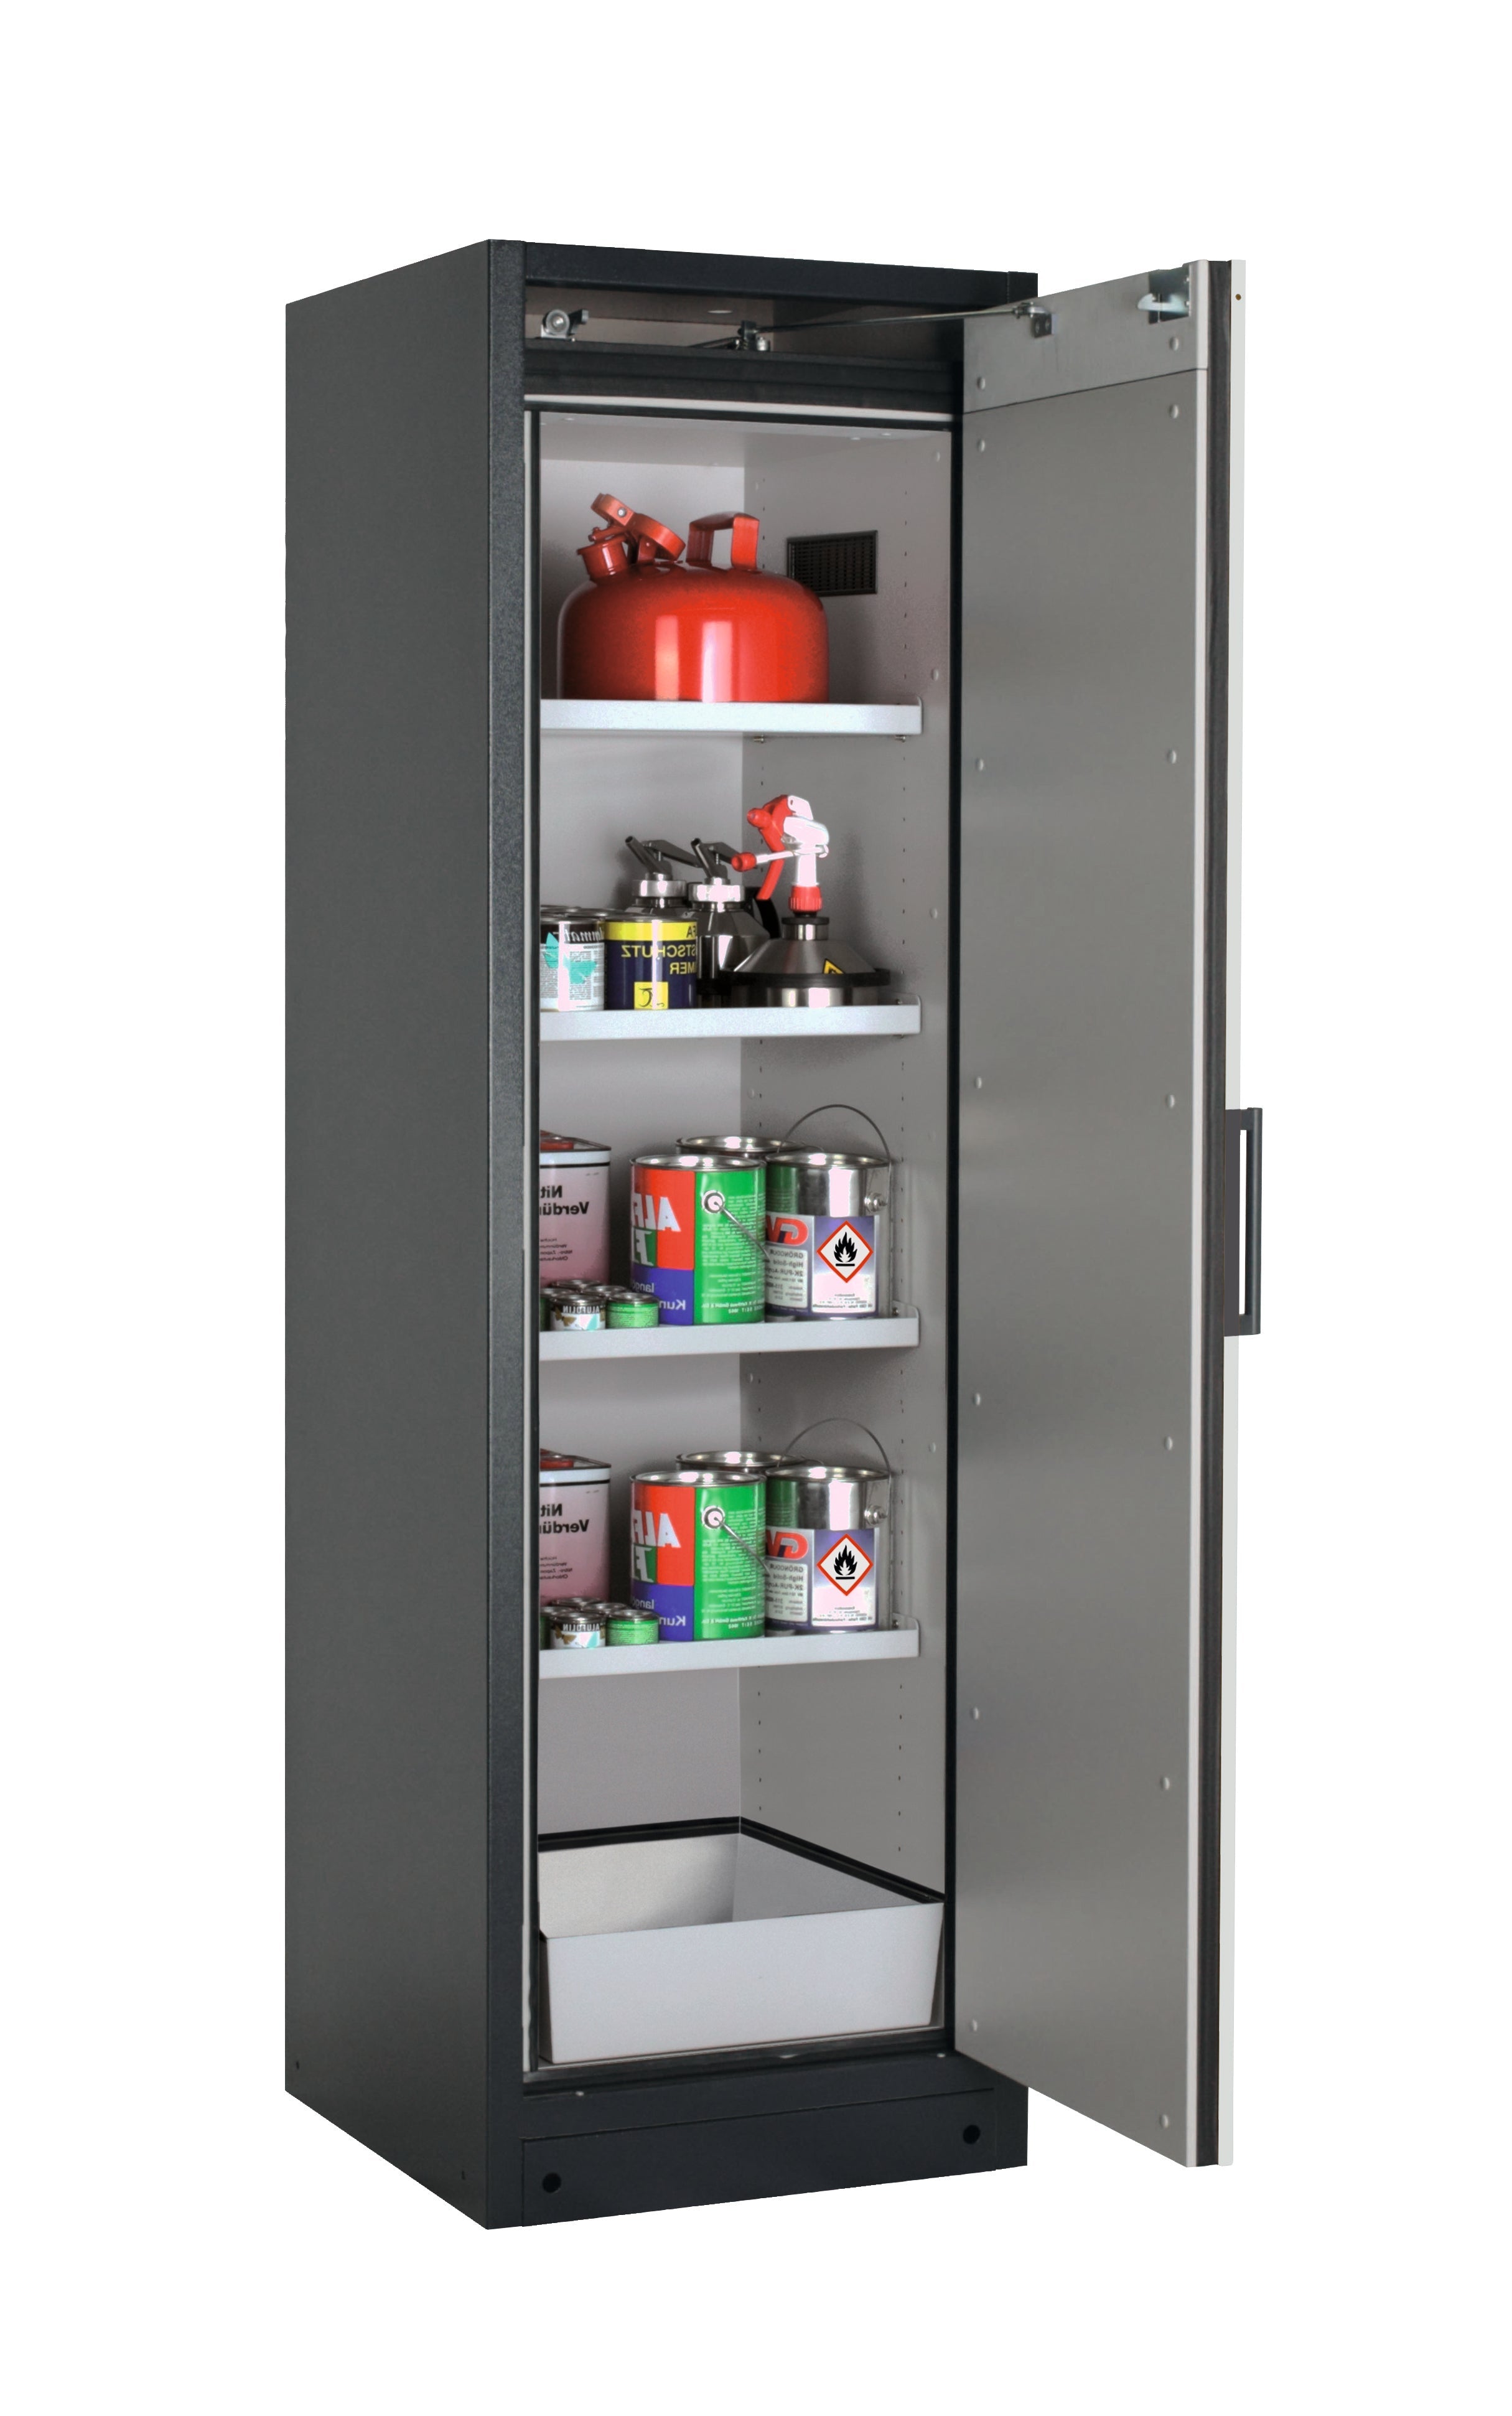 Type 90 safety storage cabinet Q-CLASSIC-90 model Q90.195.060.R in light grey RAL 7035 with 4x shelf standard (sheet steel),